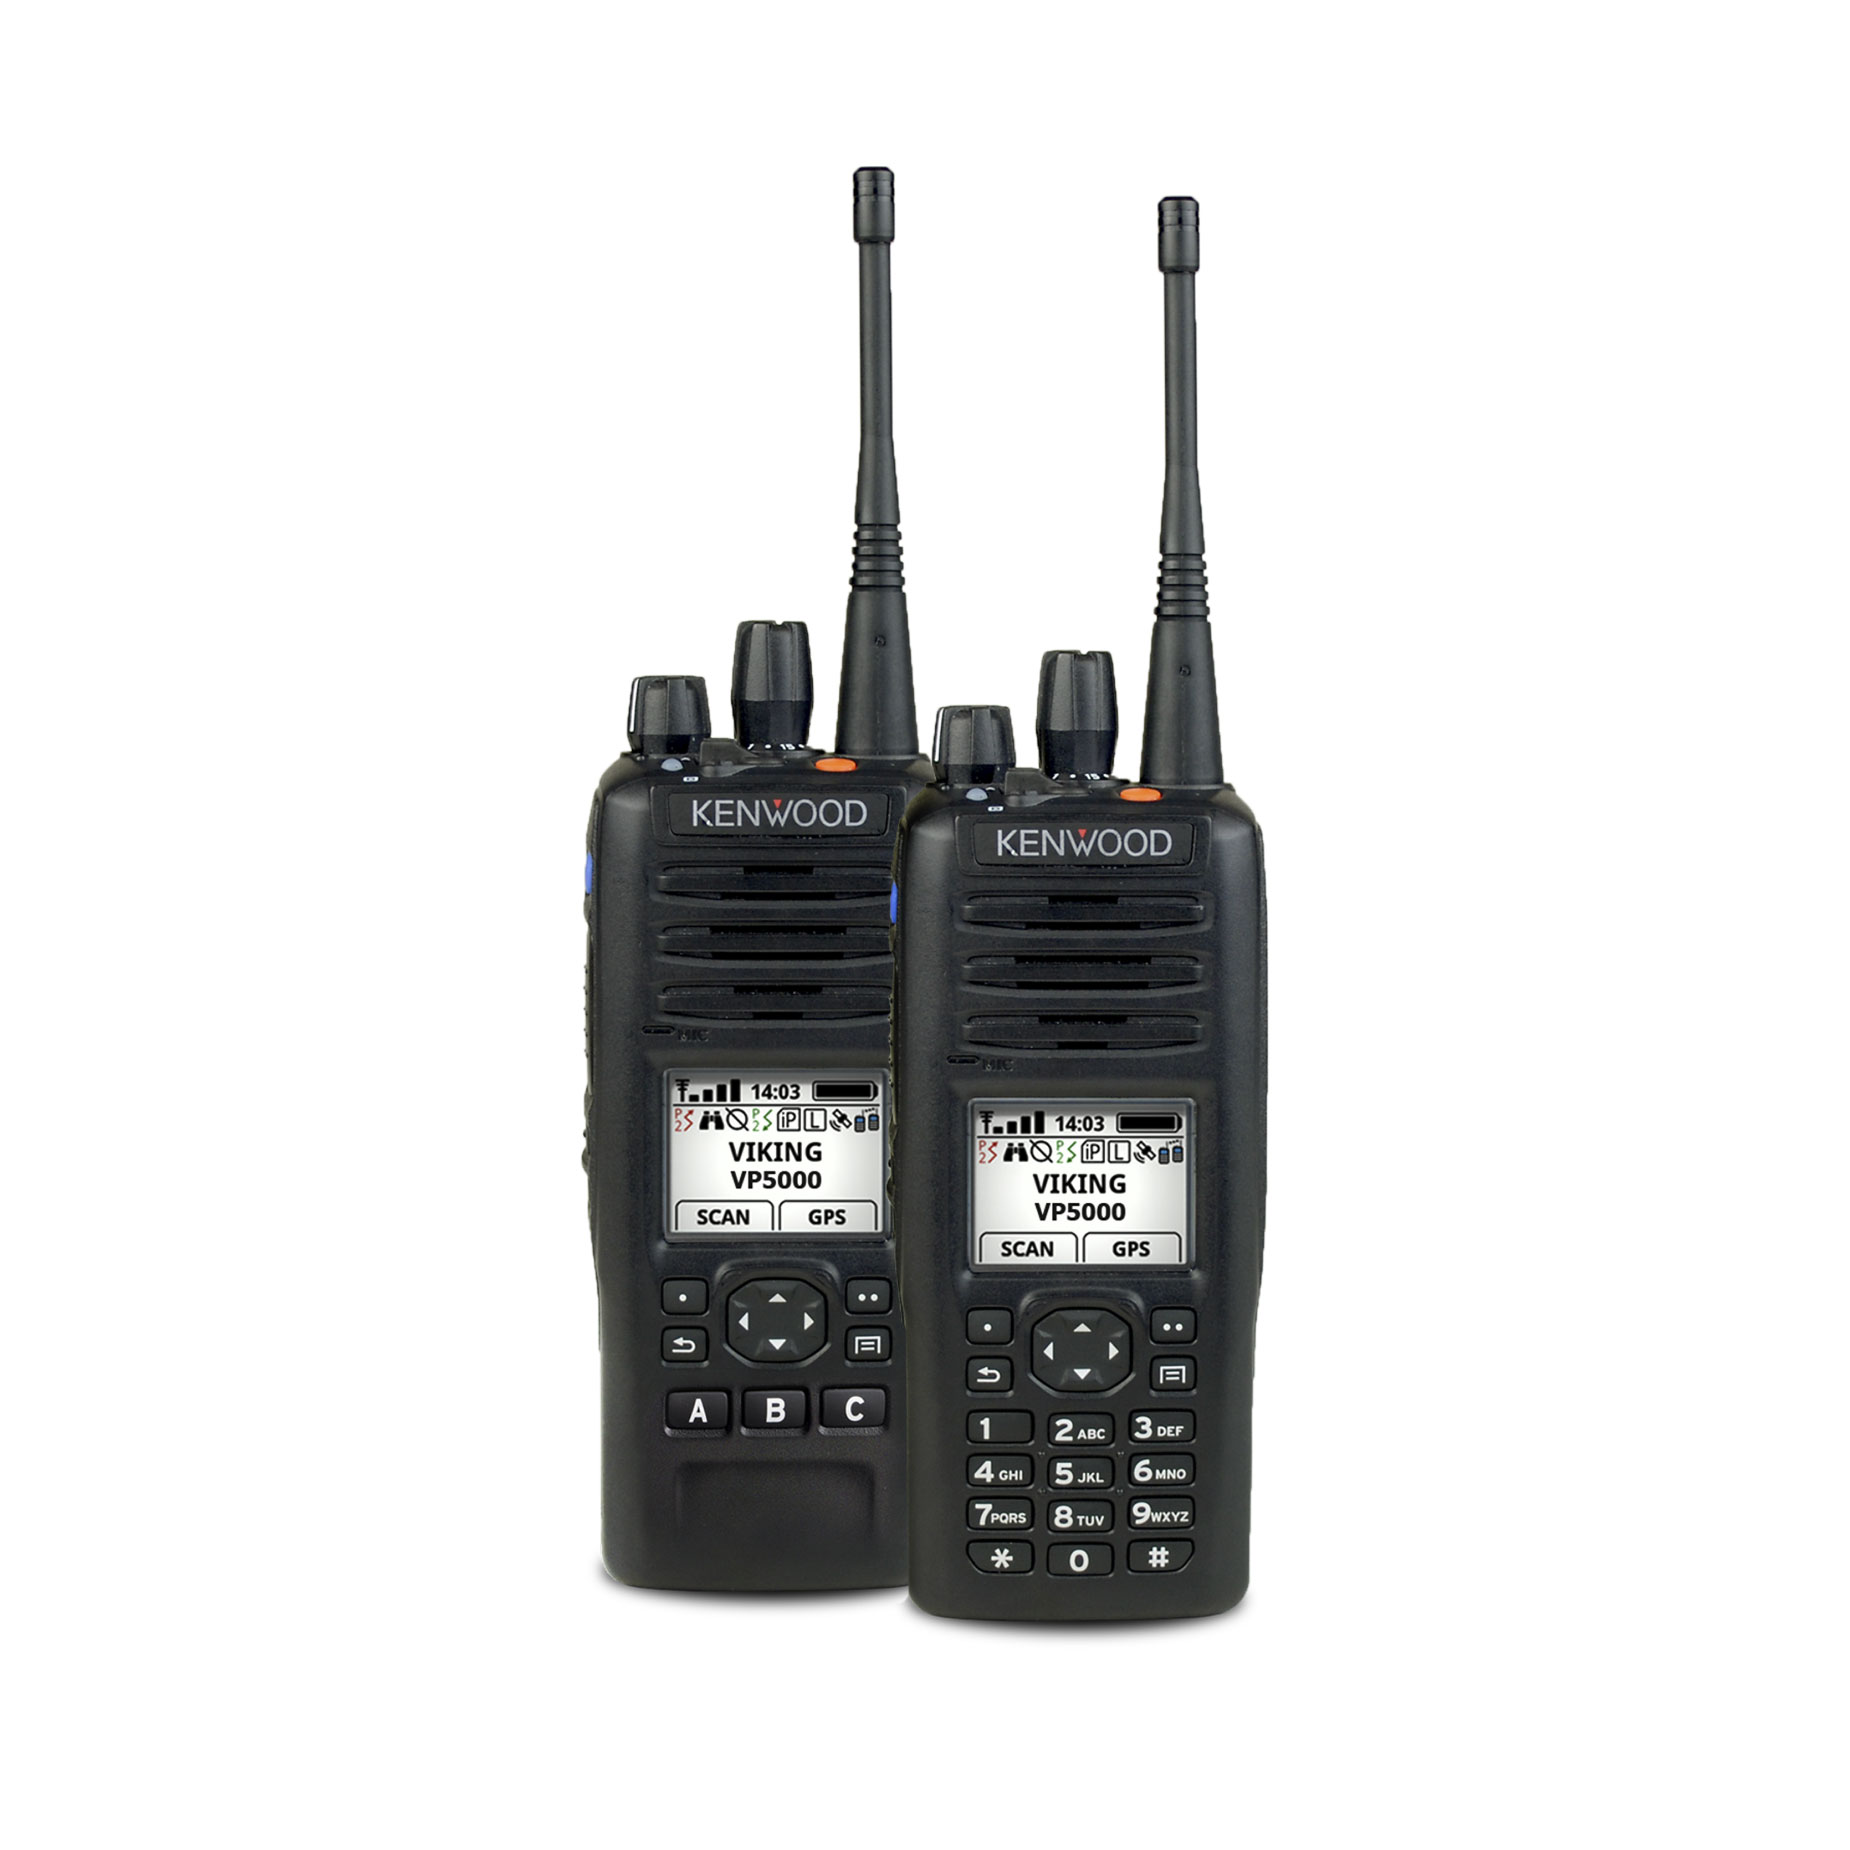 Viking-VP5000-Portable-Radio Supplied By Whisler Communications